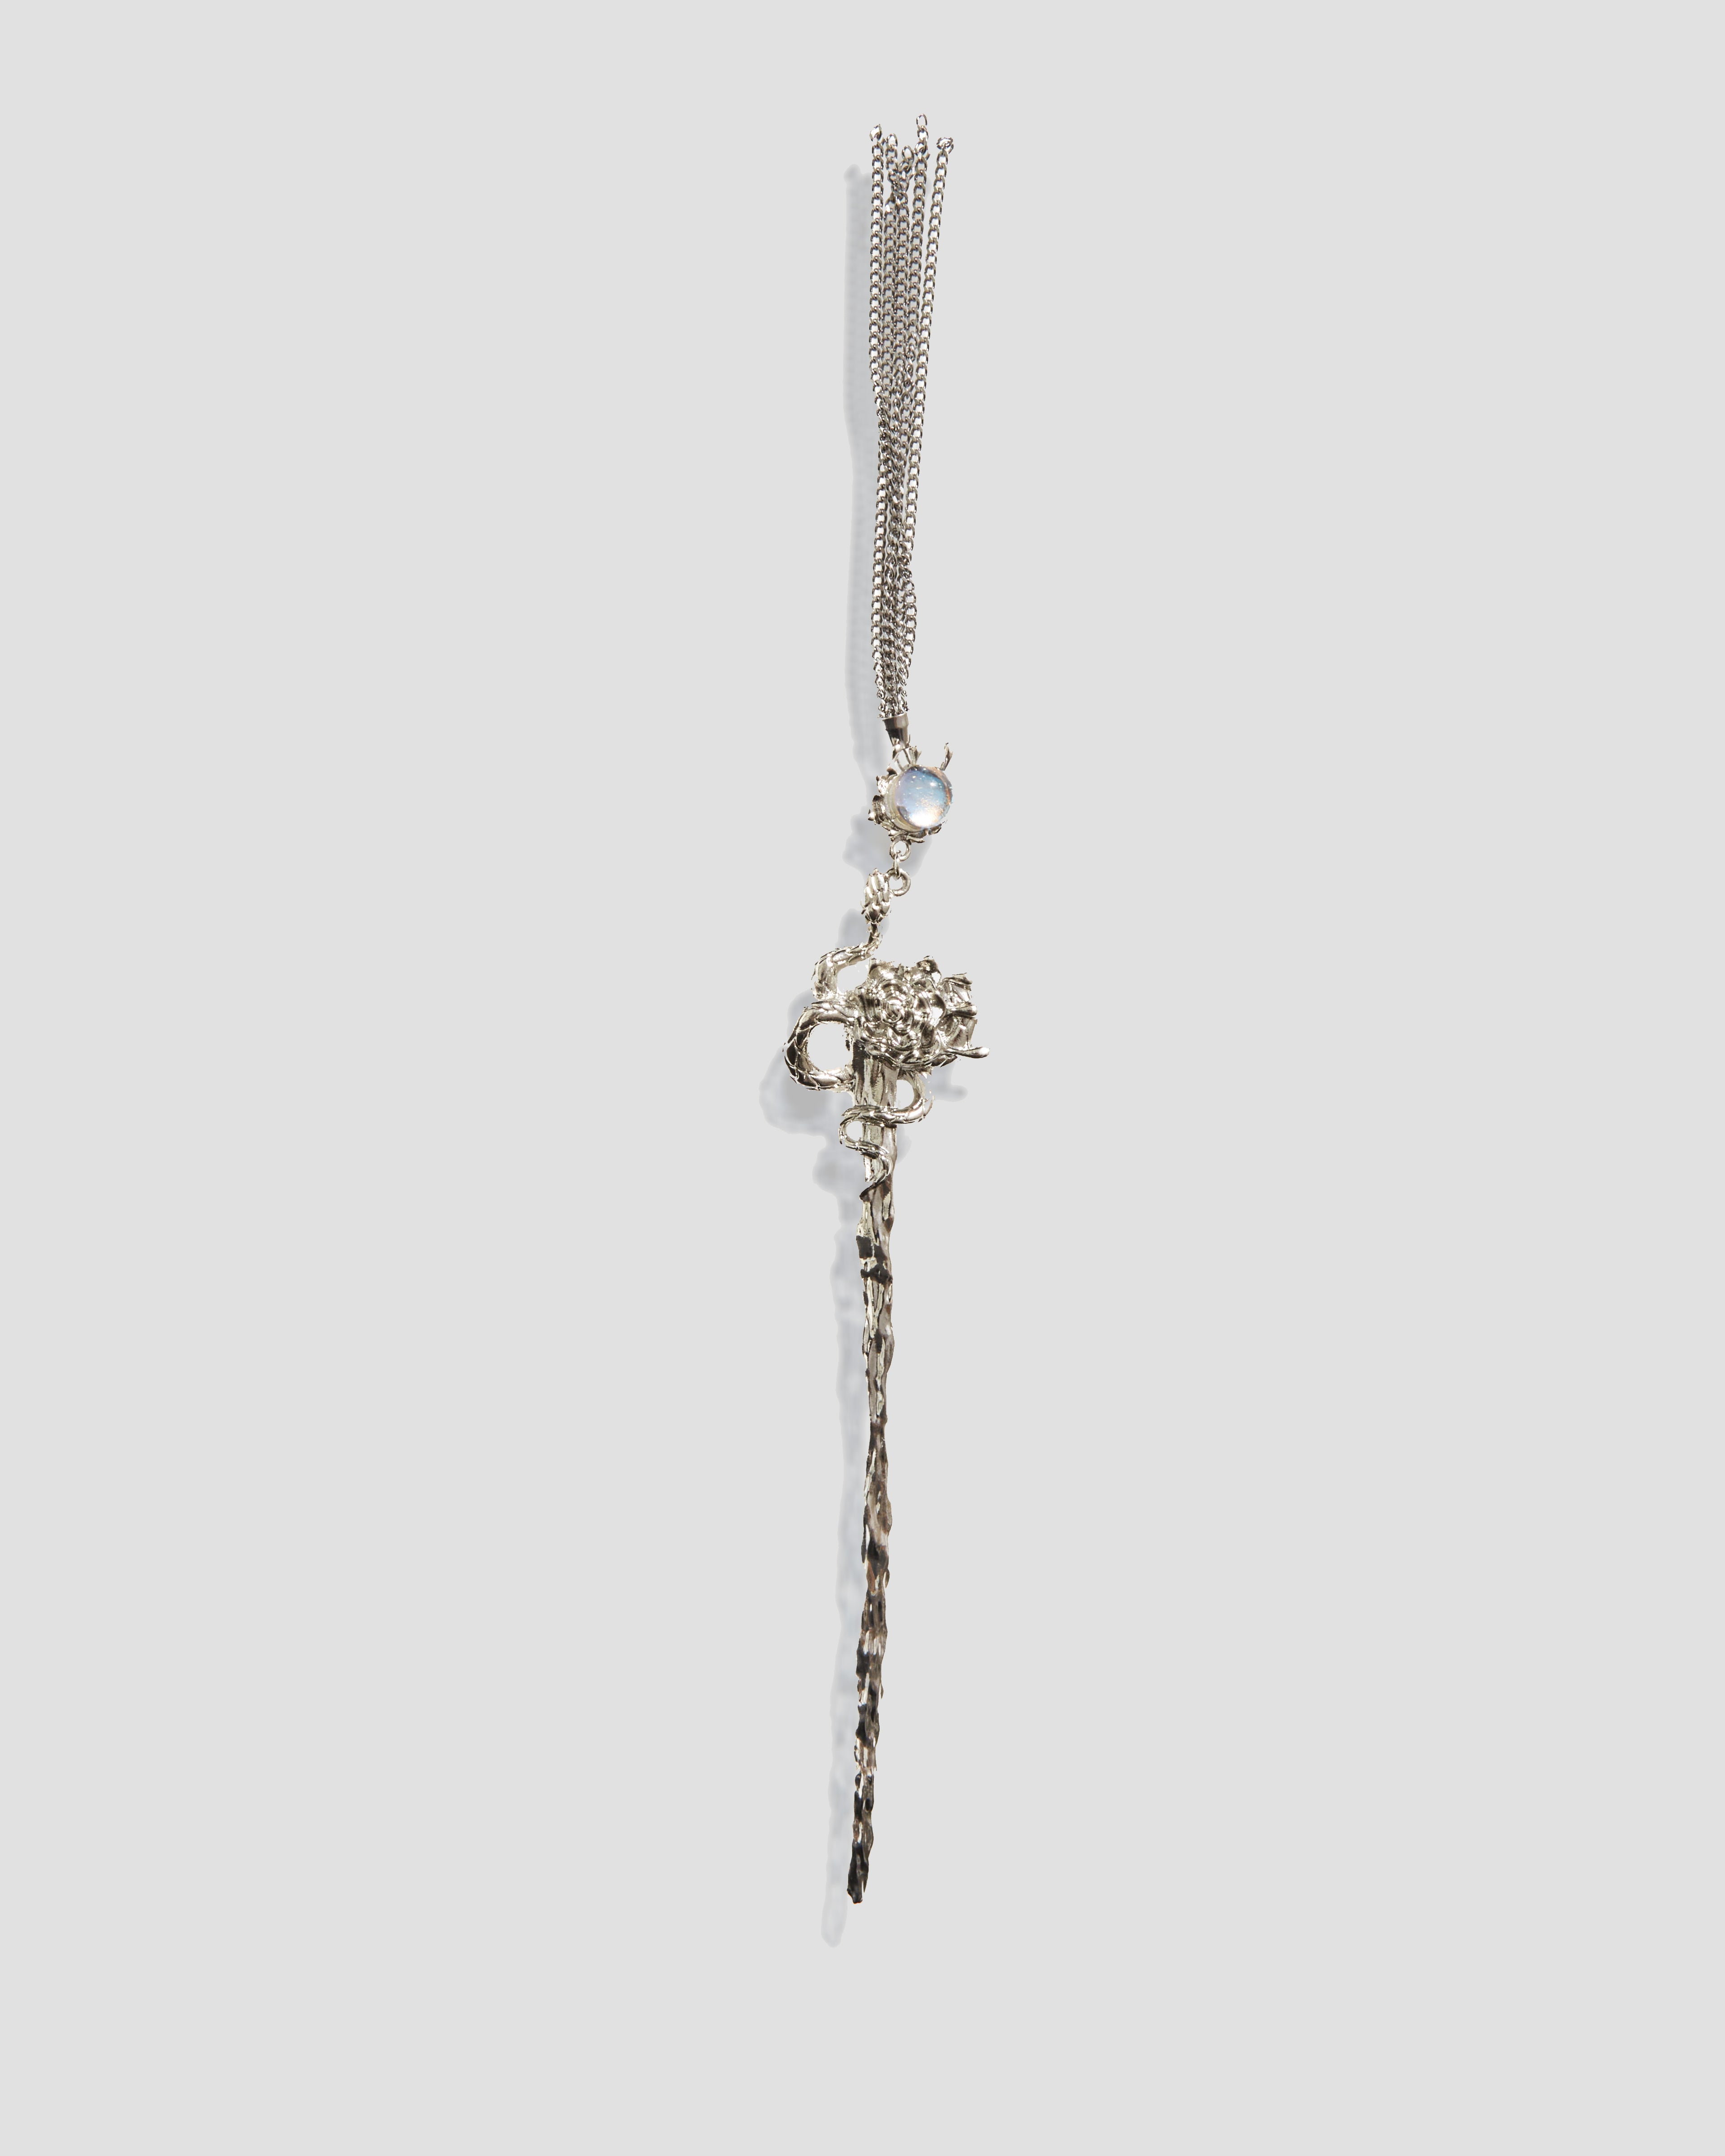 Subverter Hair Pin with Chain Tassels in Silver